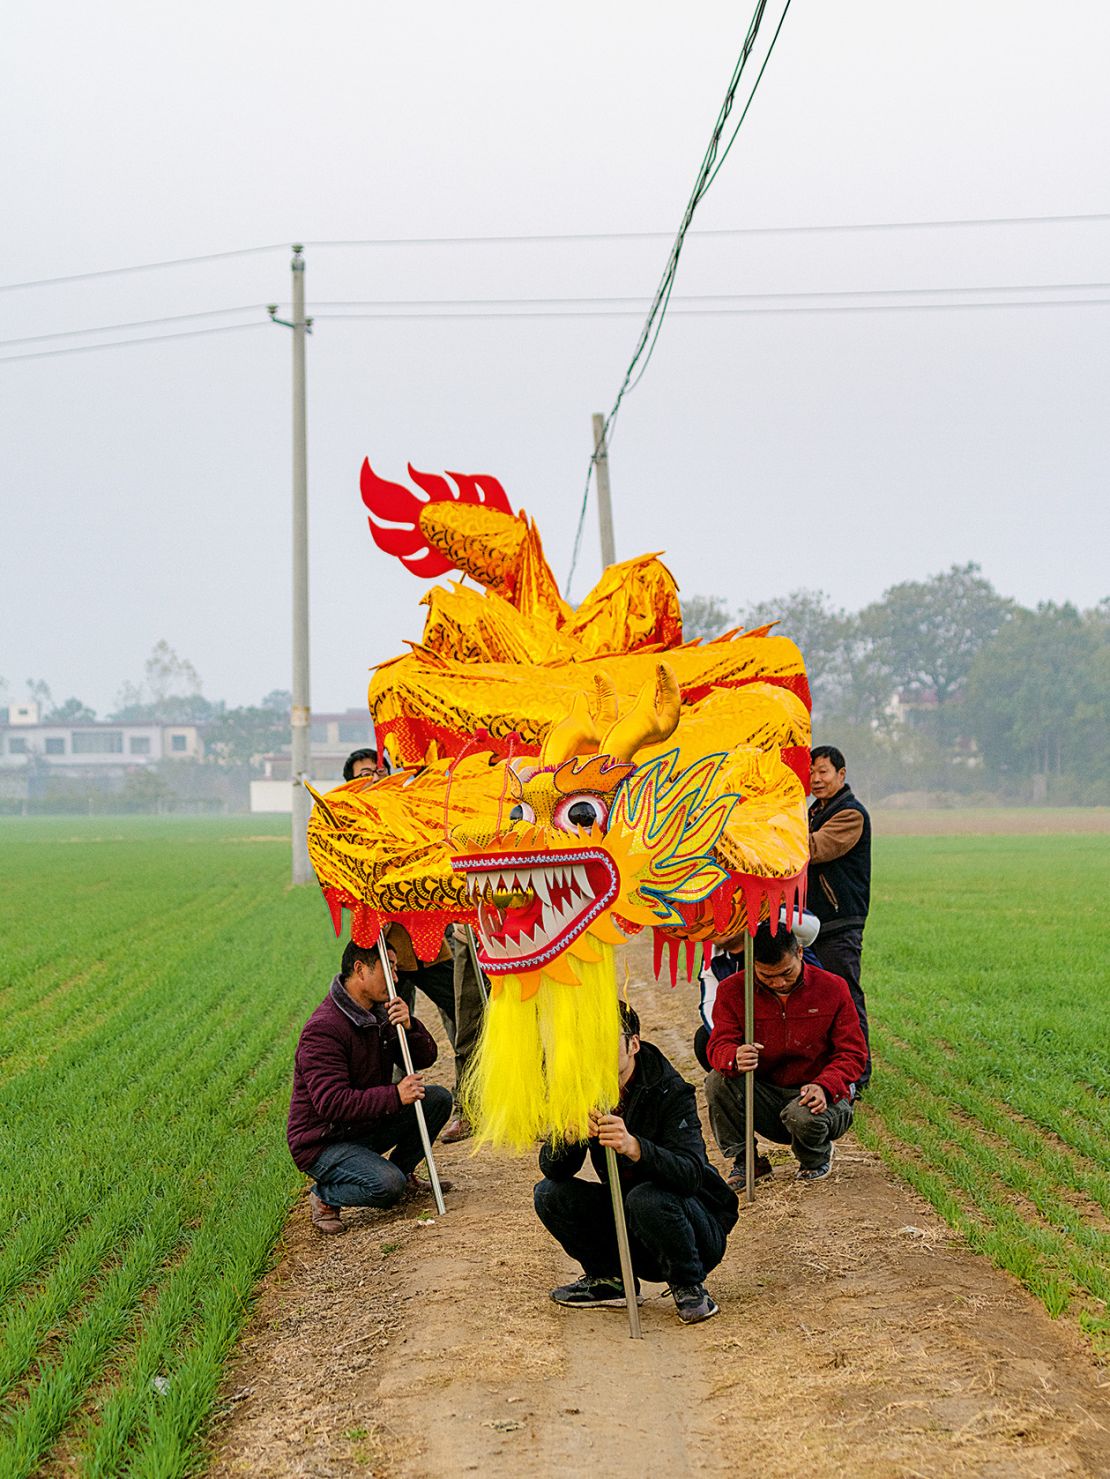 Baosheng and friends pose with a golden dragon in the field path, Huozhuang Village, Henan Province, 2018; from Community Fire (Aperture, 2023).